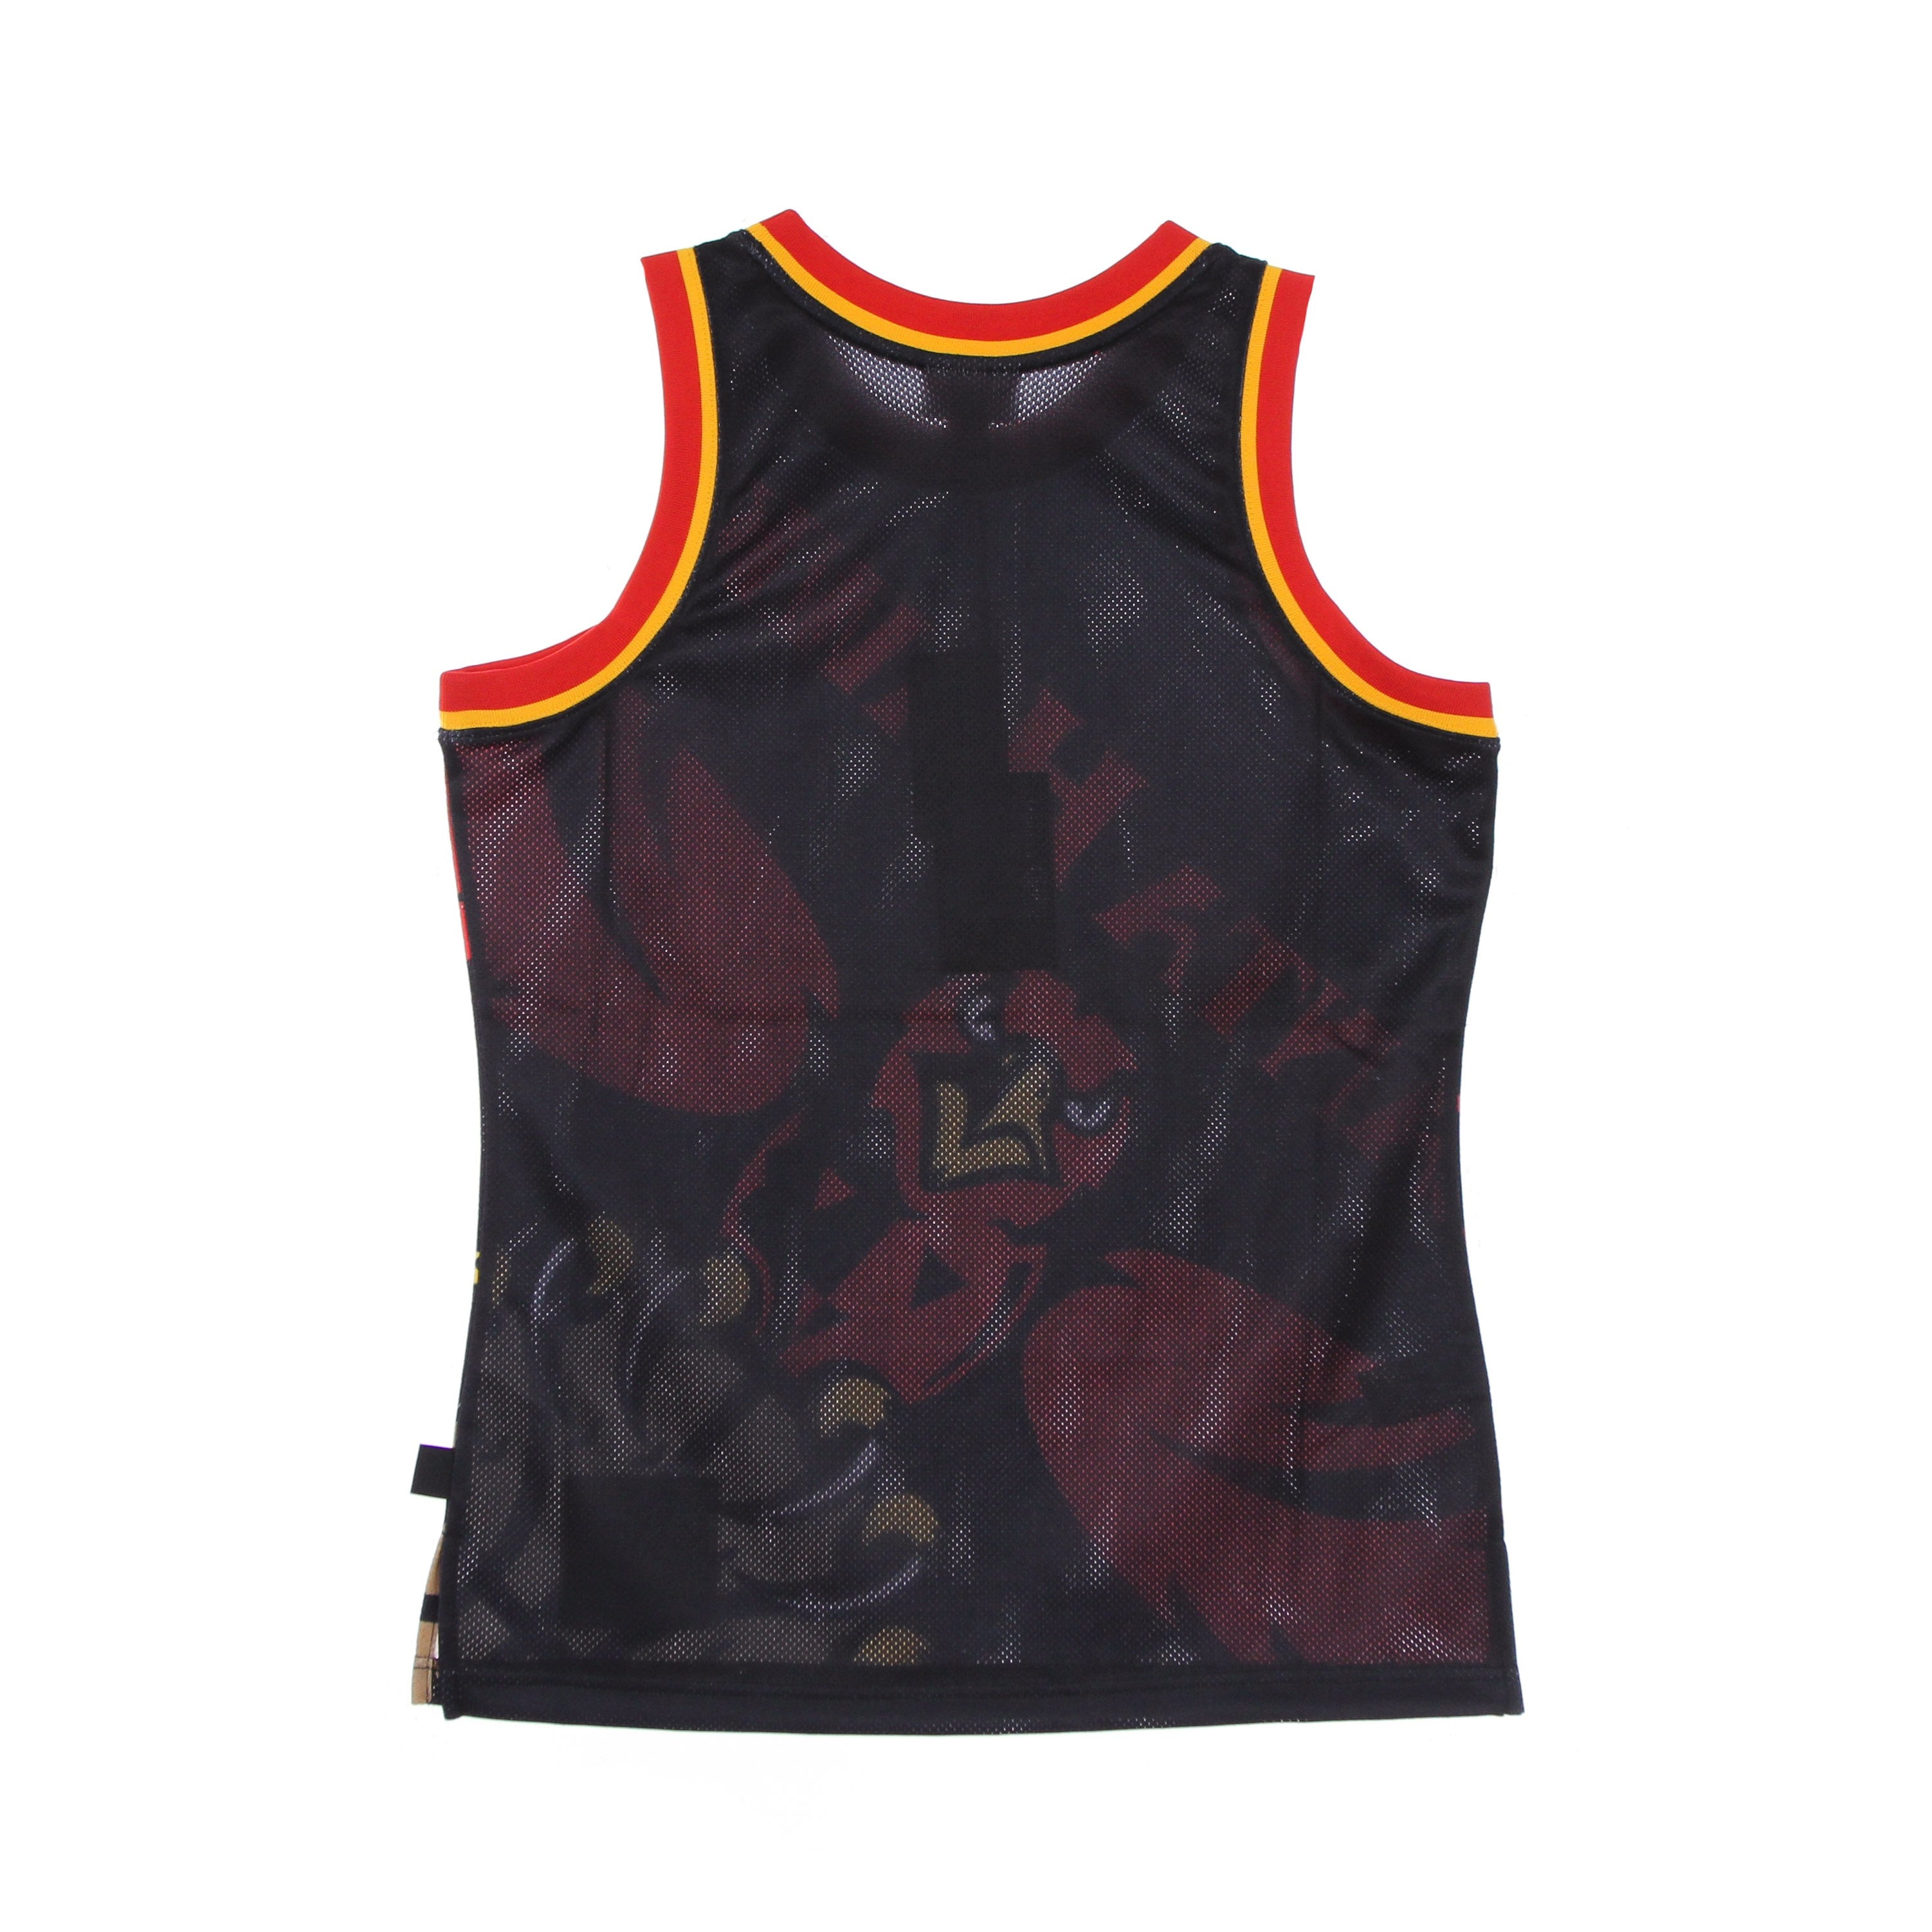 Mitchell & Ness, Canotta Tipo Basket Uomo Nba Big Face Blown Out Fashion Jersey Hardwood Classics Atlhaw, 